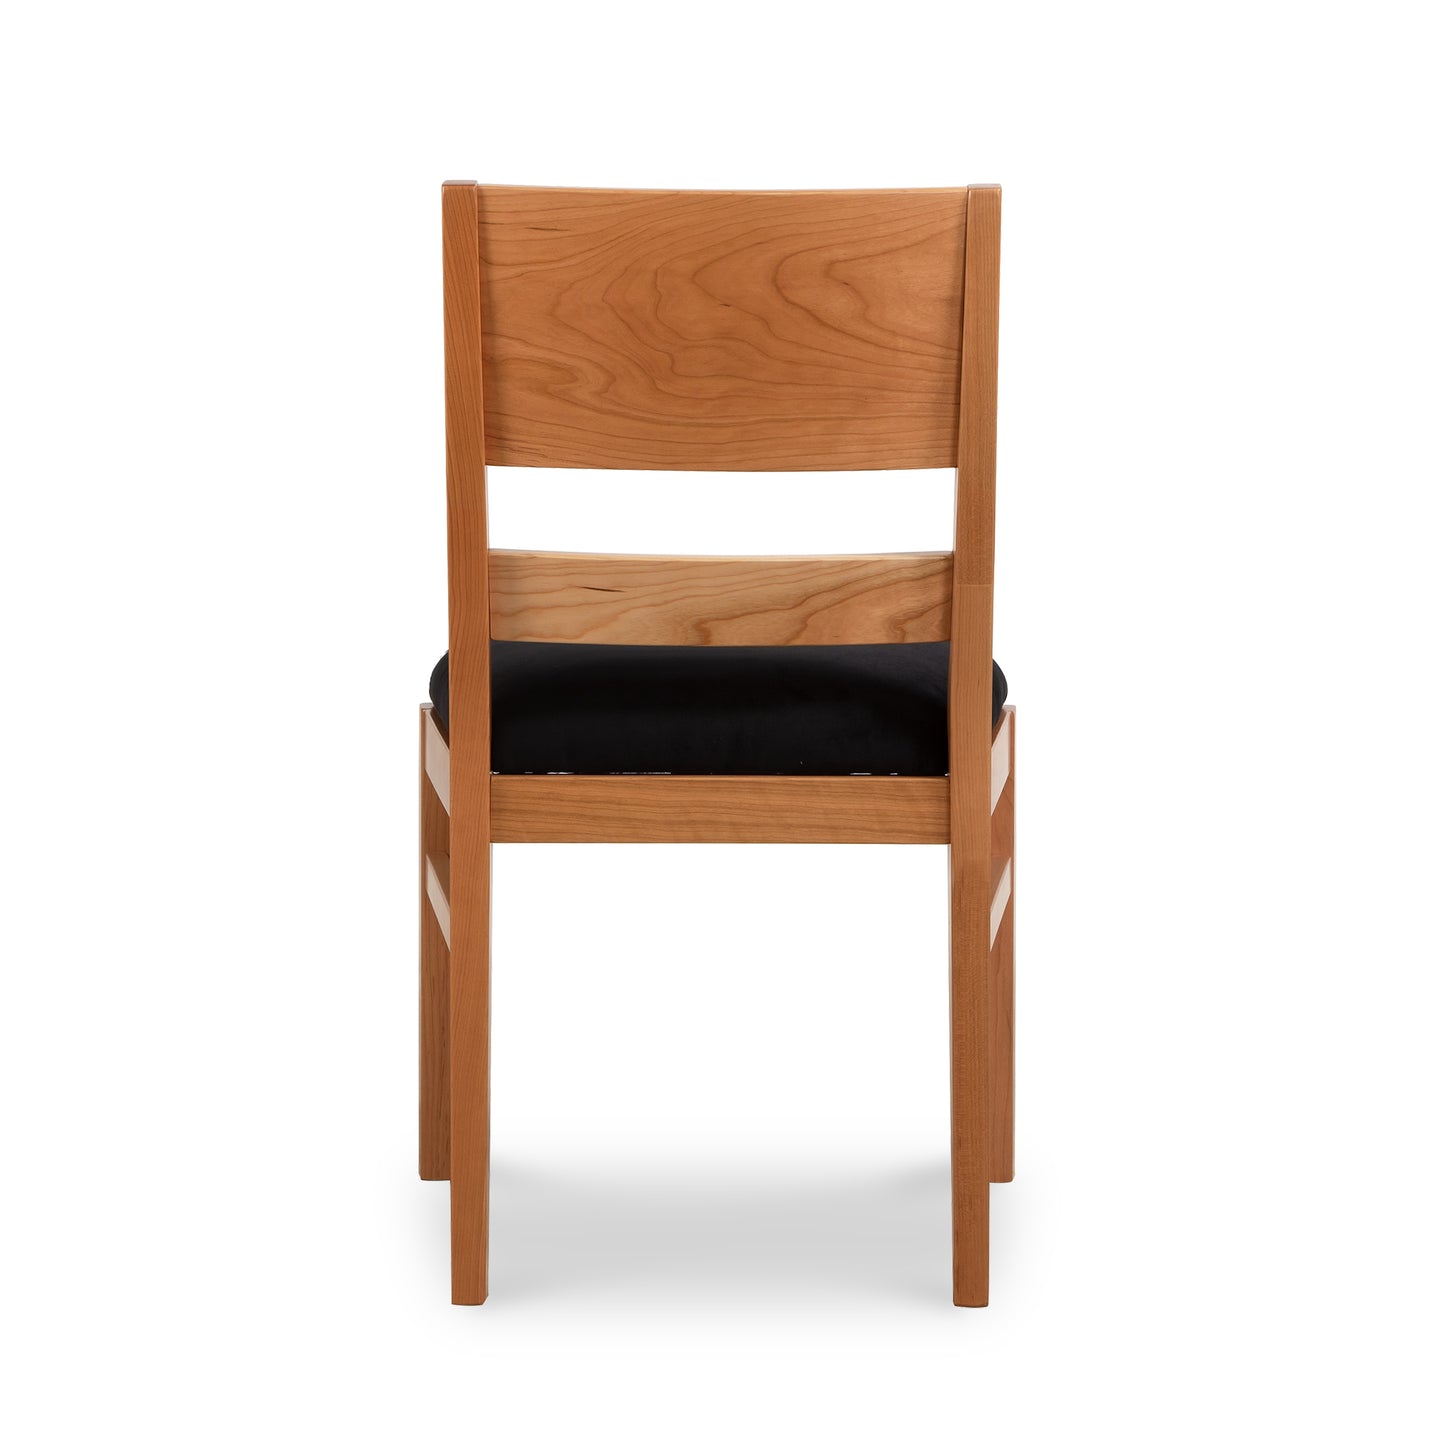 A wooden dining chair with black seat and back.